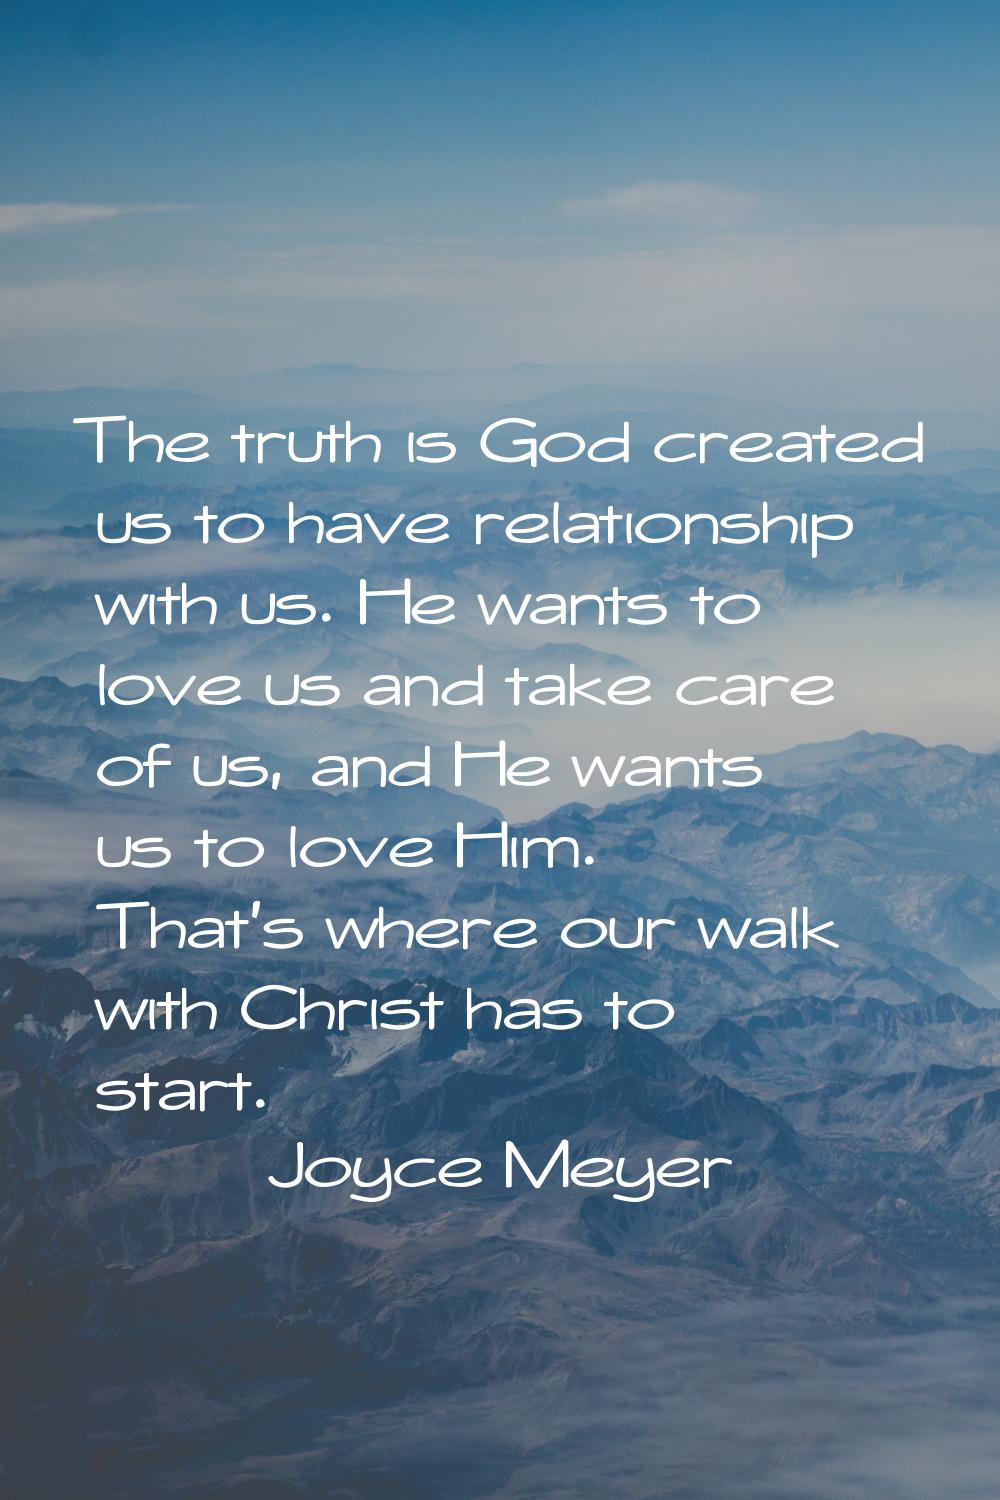 The truth is God created us to have relationship with us. He wants to love us and take care of us, 